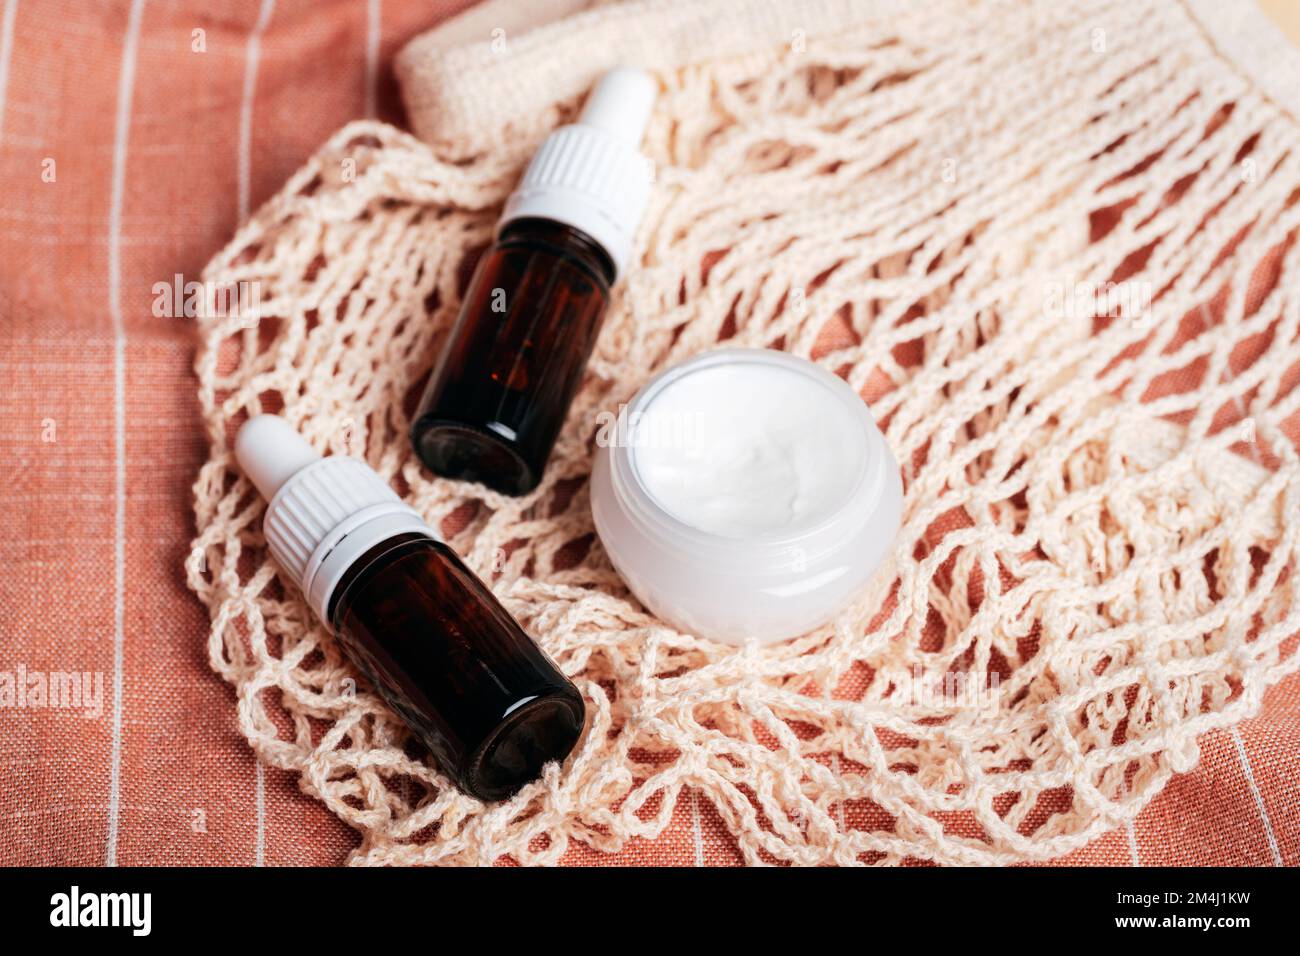 Cream jar and brown glass bottles with essential oils on mesh bag. Organic spa cosmetic beauty product. Zero waste concept. Top view Stock Photo